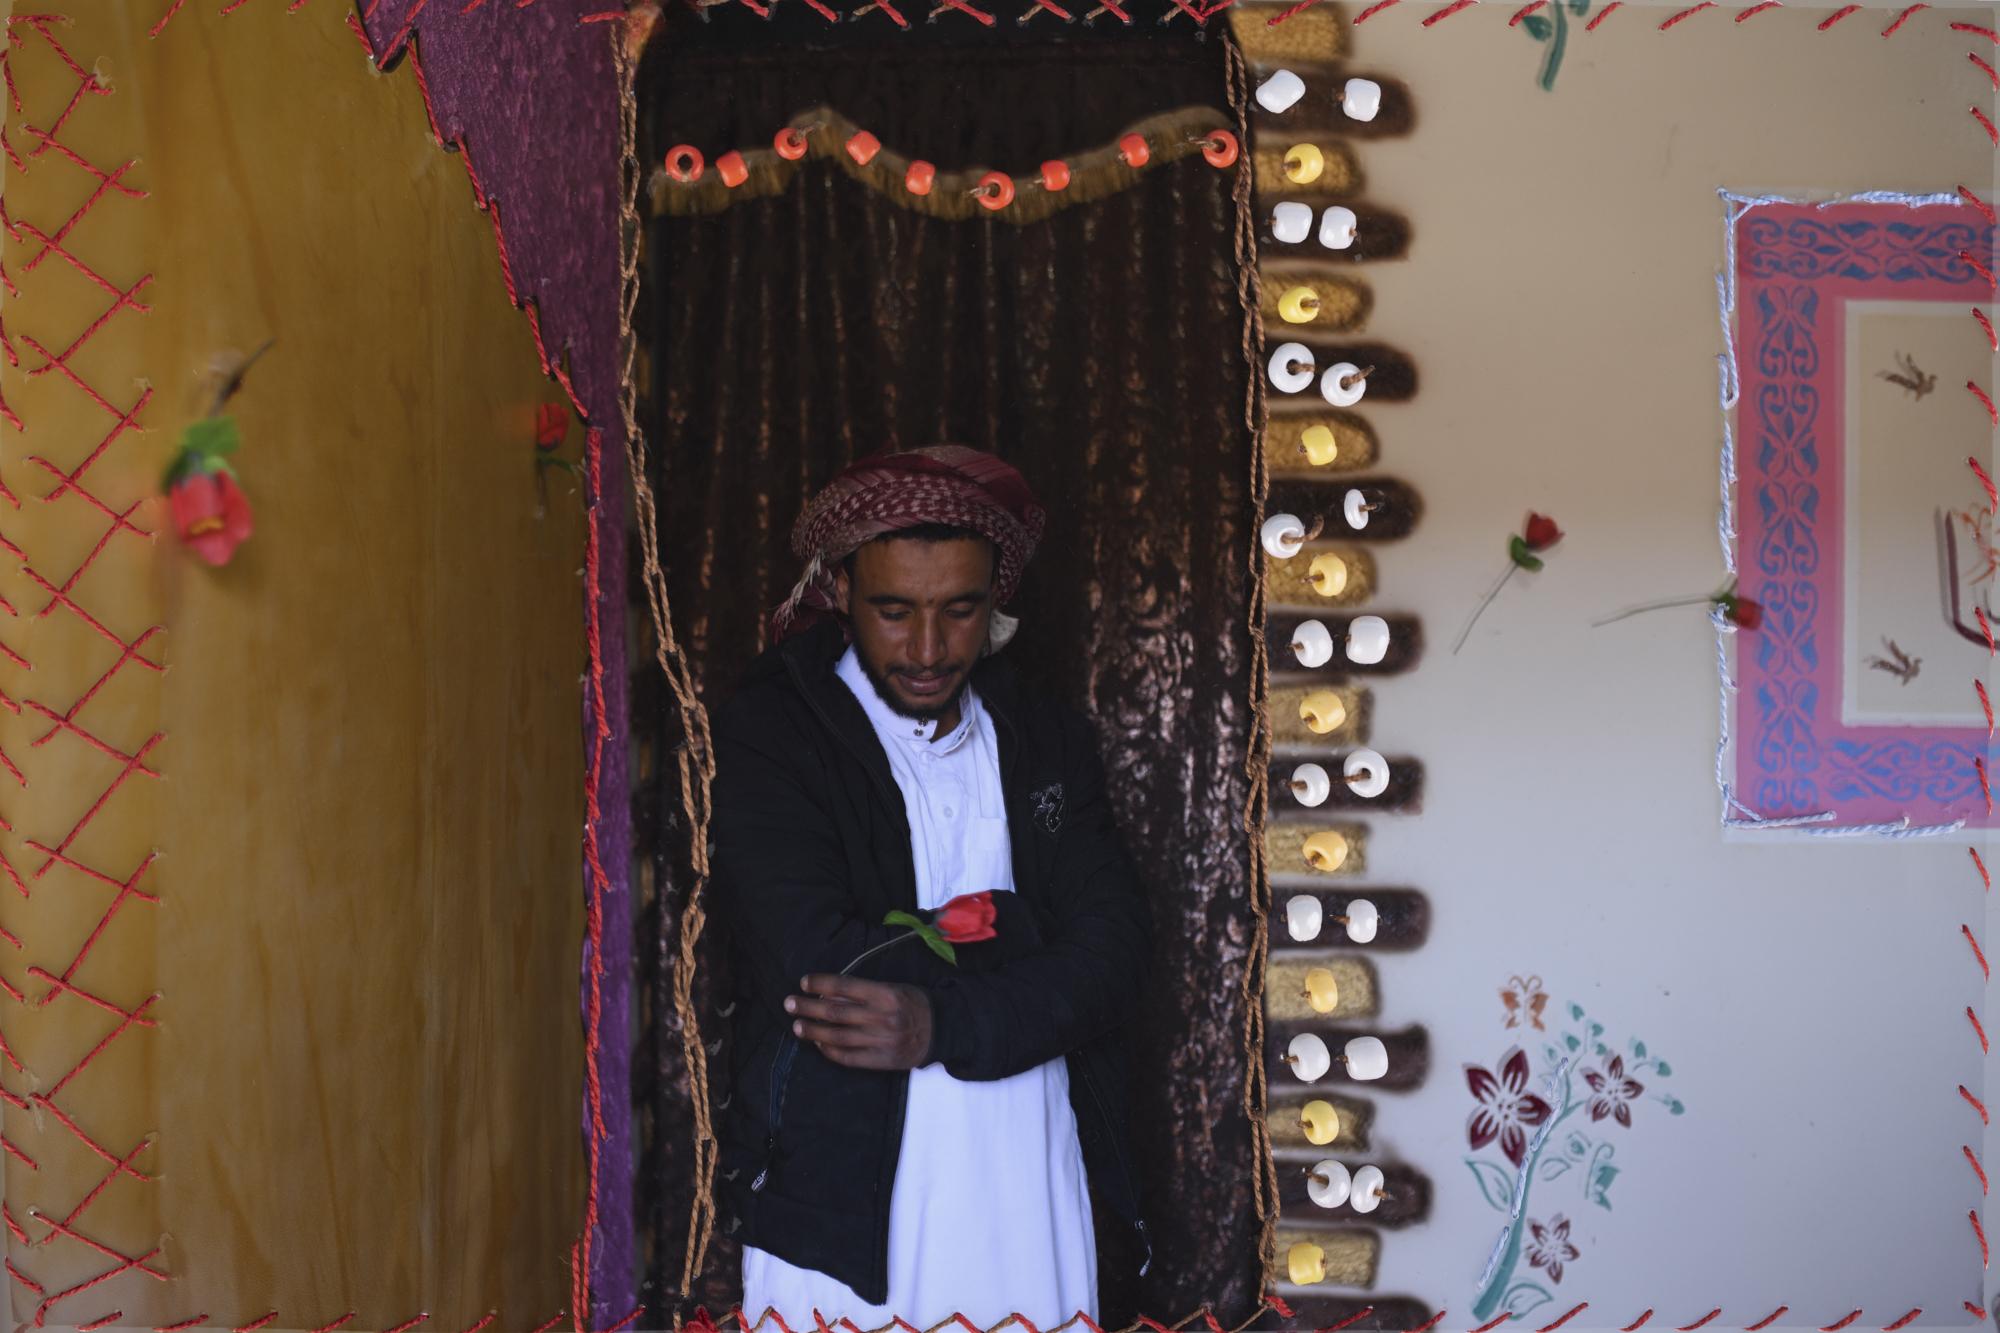 On National Geographic: In one of Egypt's most spiritual places, Bedouins find peace and resilience - An embroidered photograph of Mahmoud Abdo in his home in Al Tarfa Village. His cousin Nora...